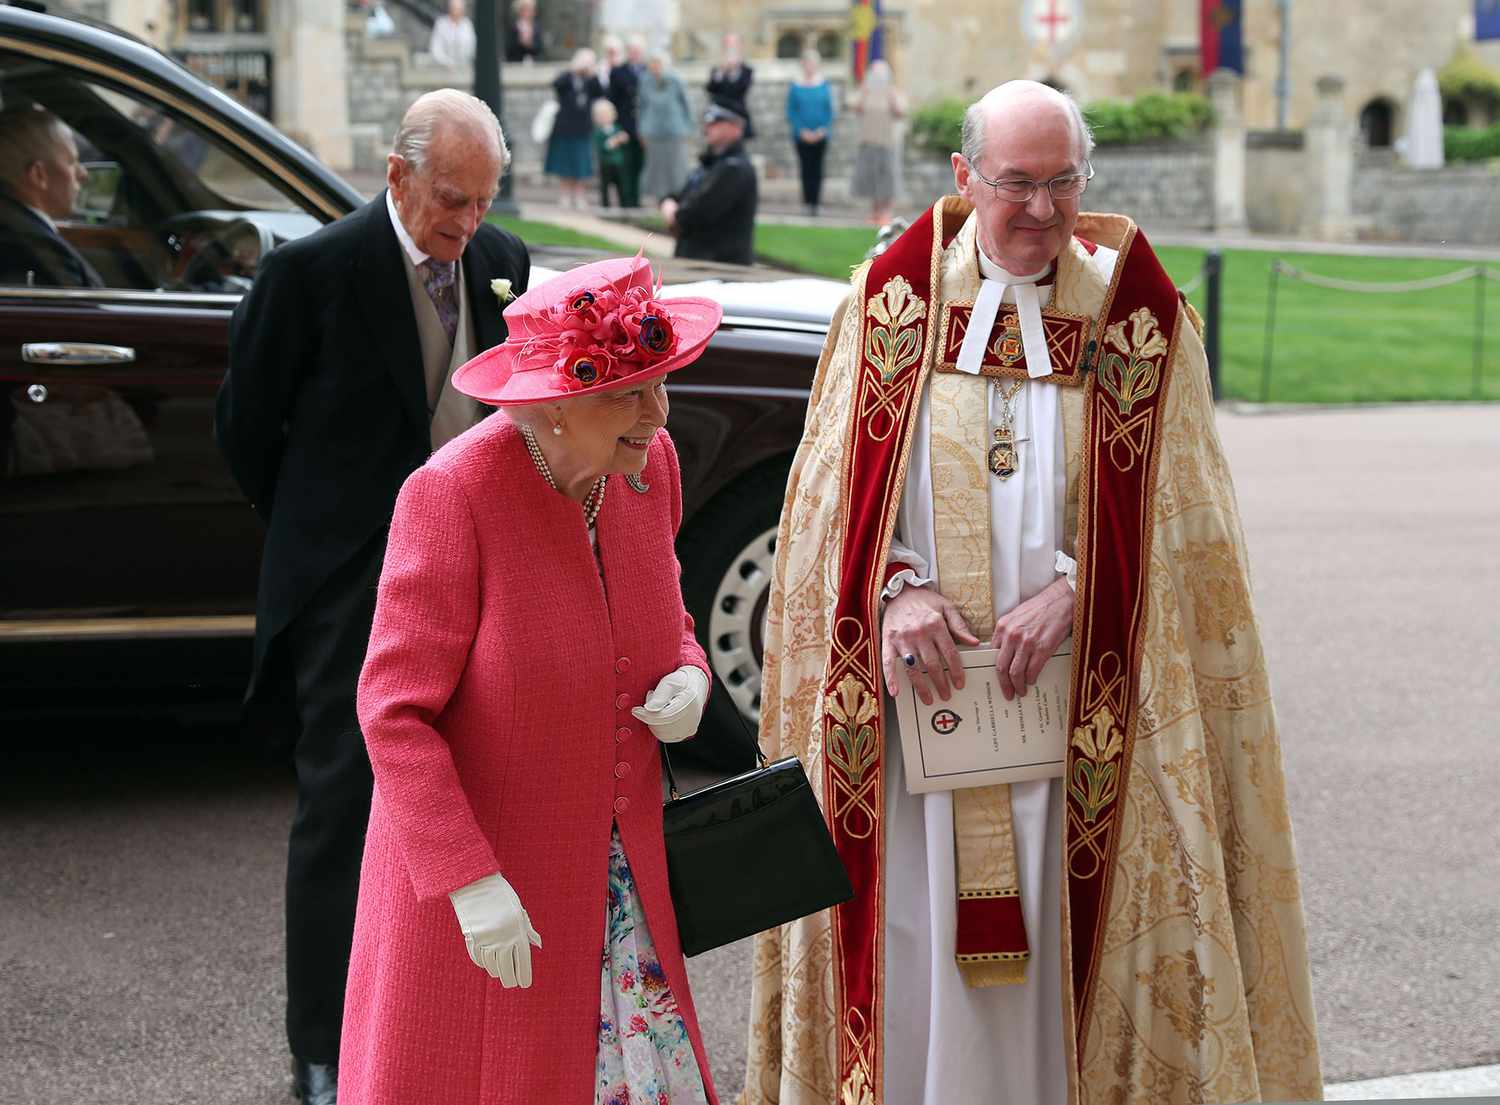 Mandatory Credit: Photo by REX/Shutterstock (10240228i) Queen Elizabeth II and the Prince Philip arrive ahead of the wedding The wedding of Lady Gabriella Windsor and Thomas Kingston, St George's Chapel, Windsor Castle, UK - 18 May 2019